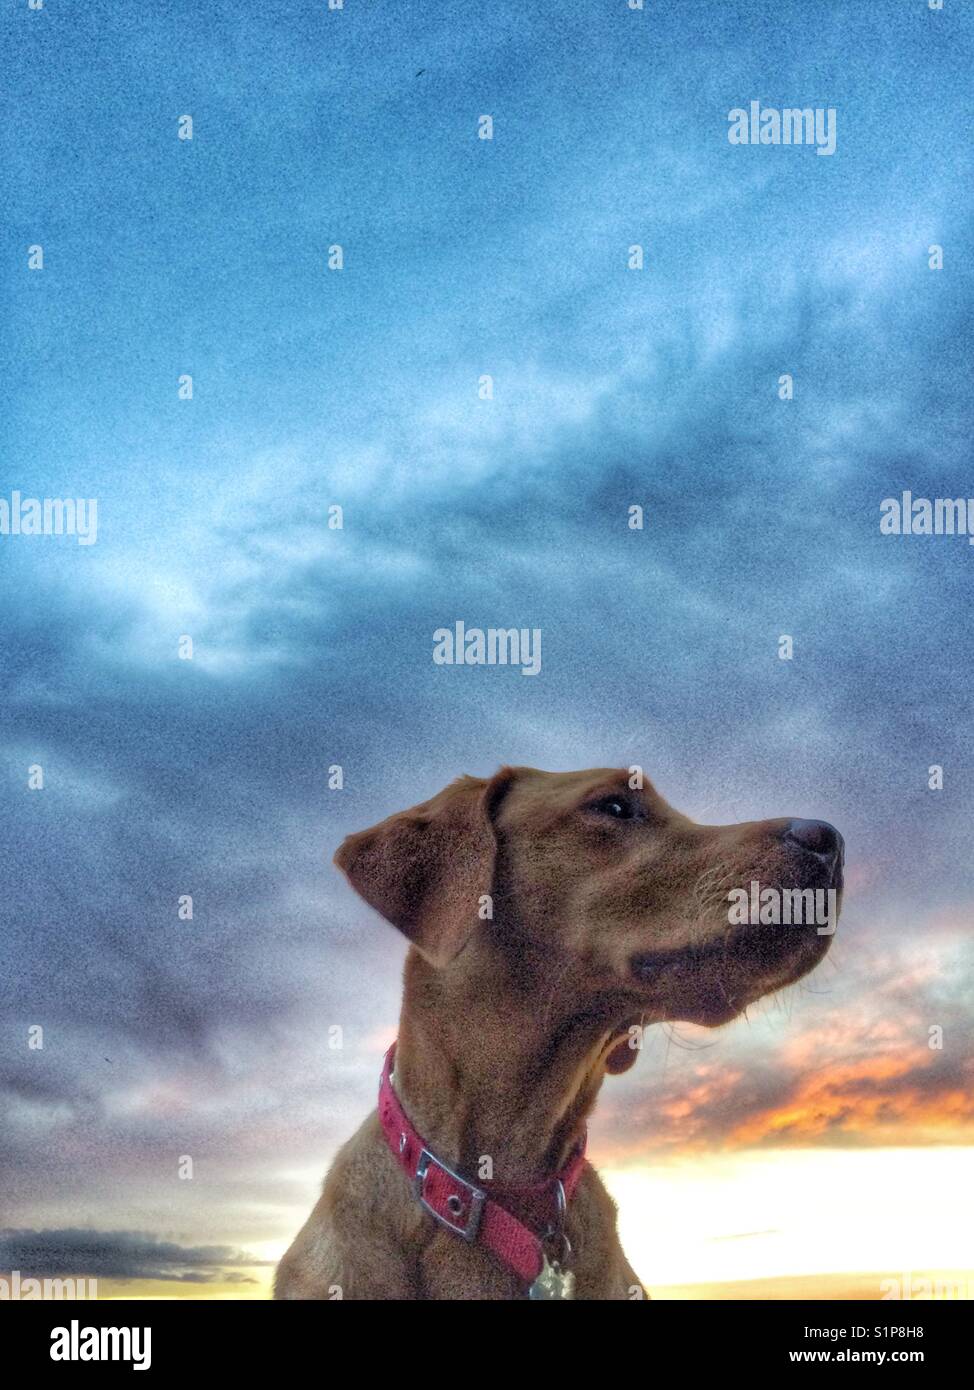 A yellow labrador retriever looking regal and dignified with a colourful sunset and dramatic clouds behind Stock Photo